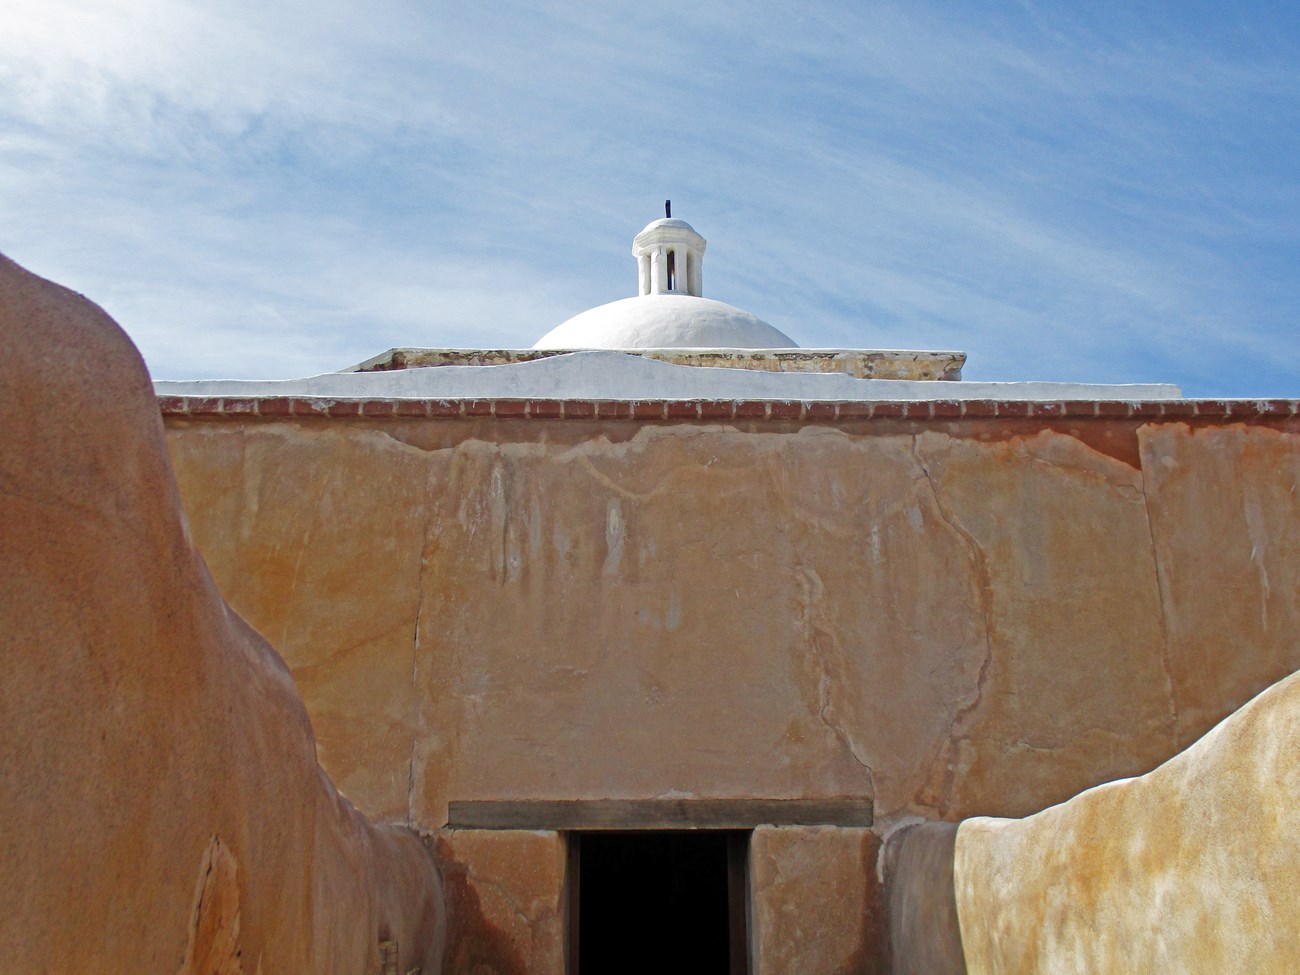 Adobe buildings with a centered doorway.